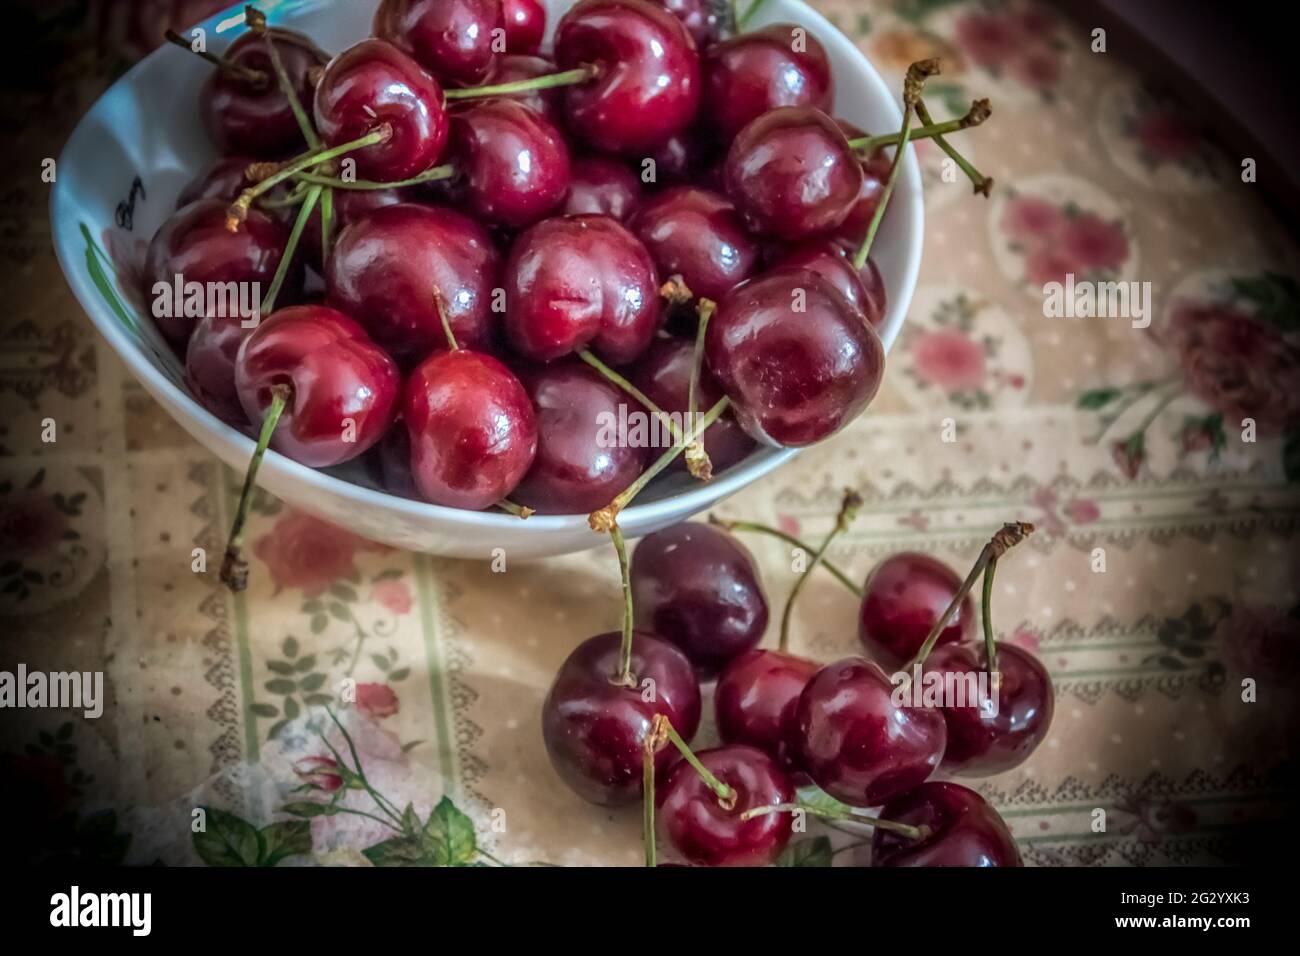 A colorful setup of red summer fruits Stock Photo